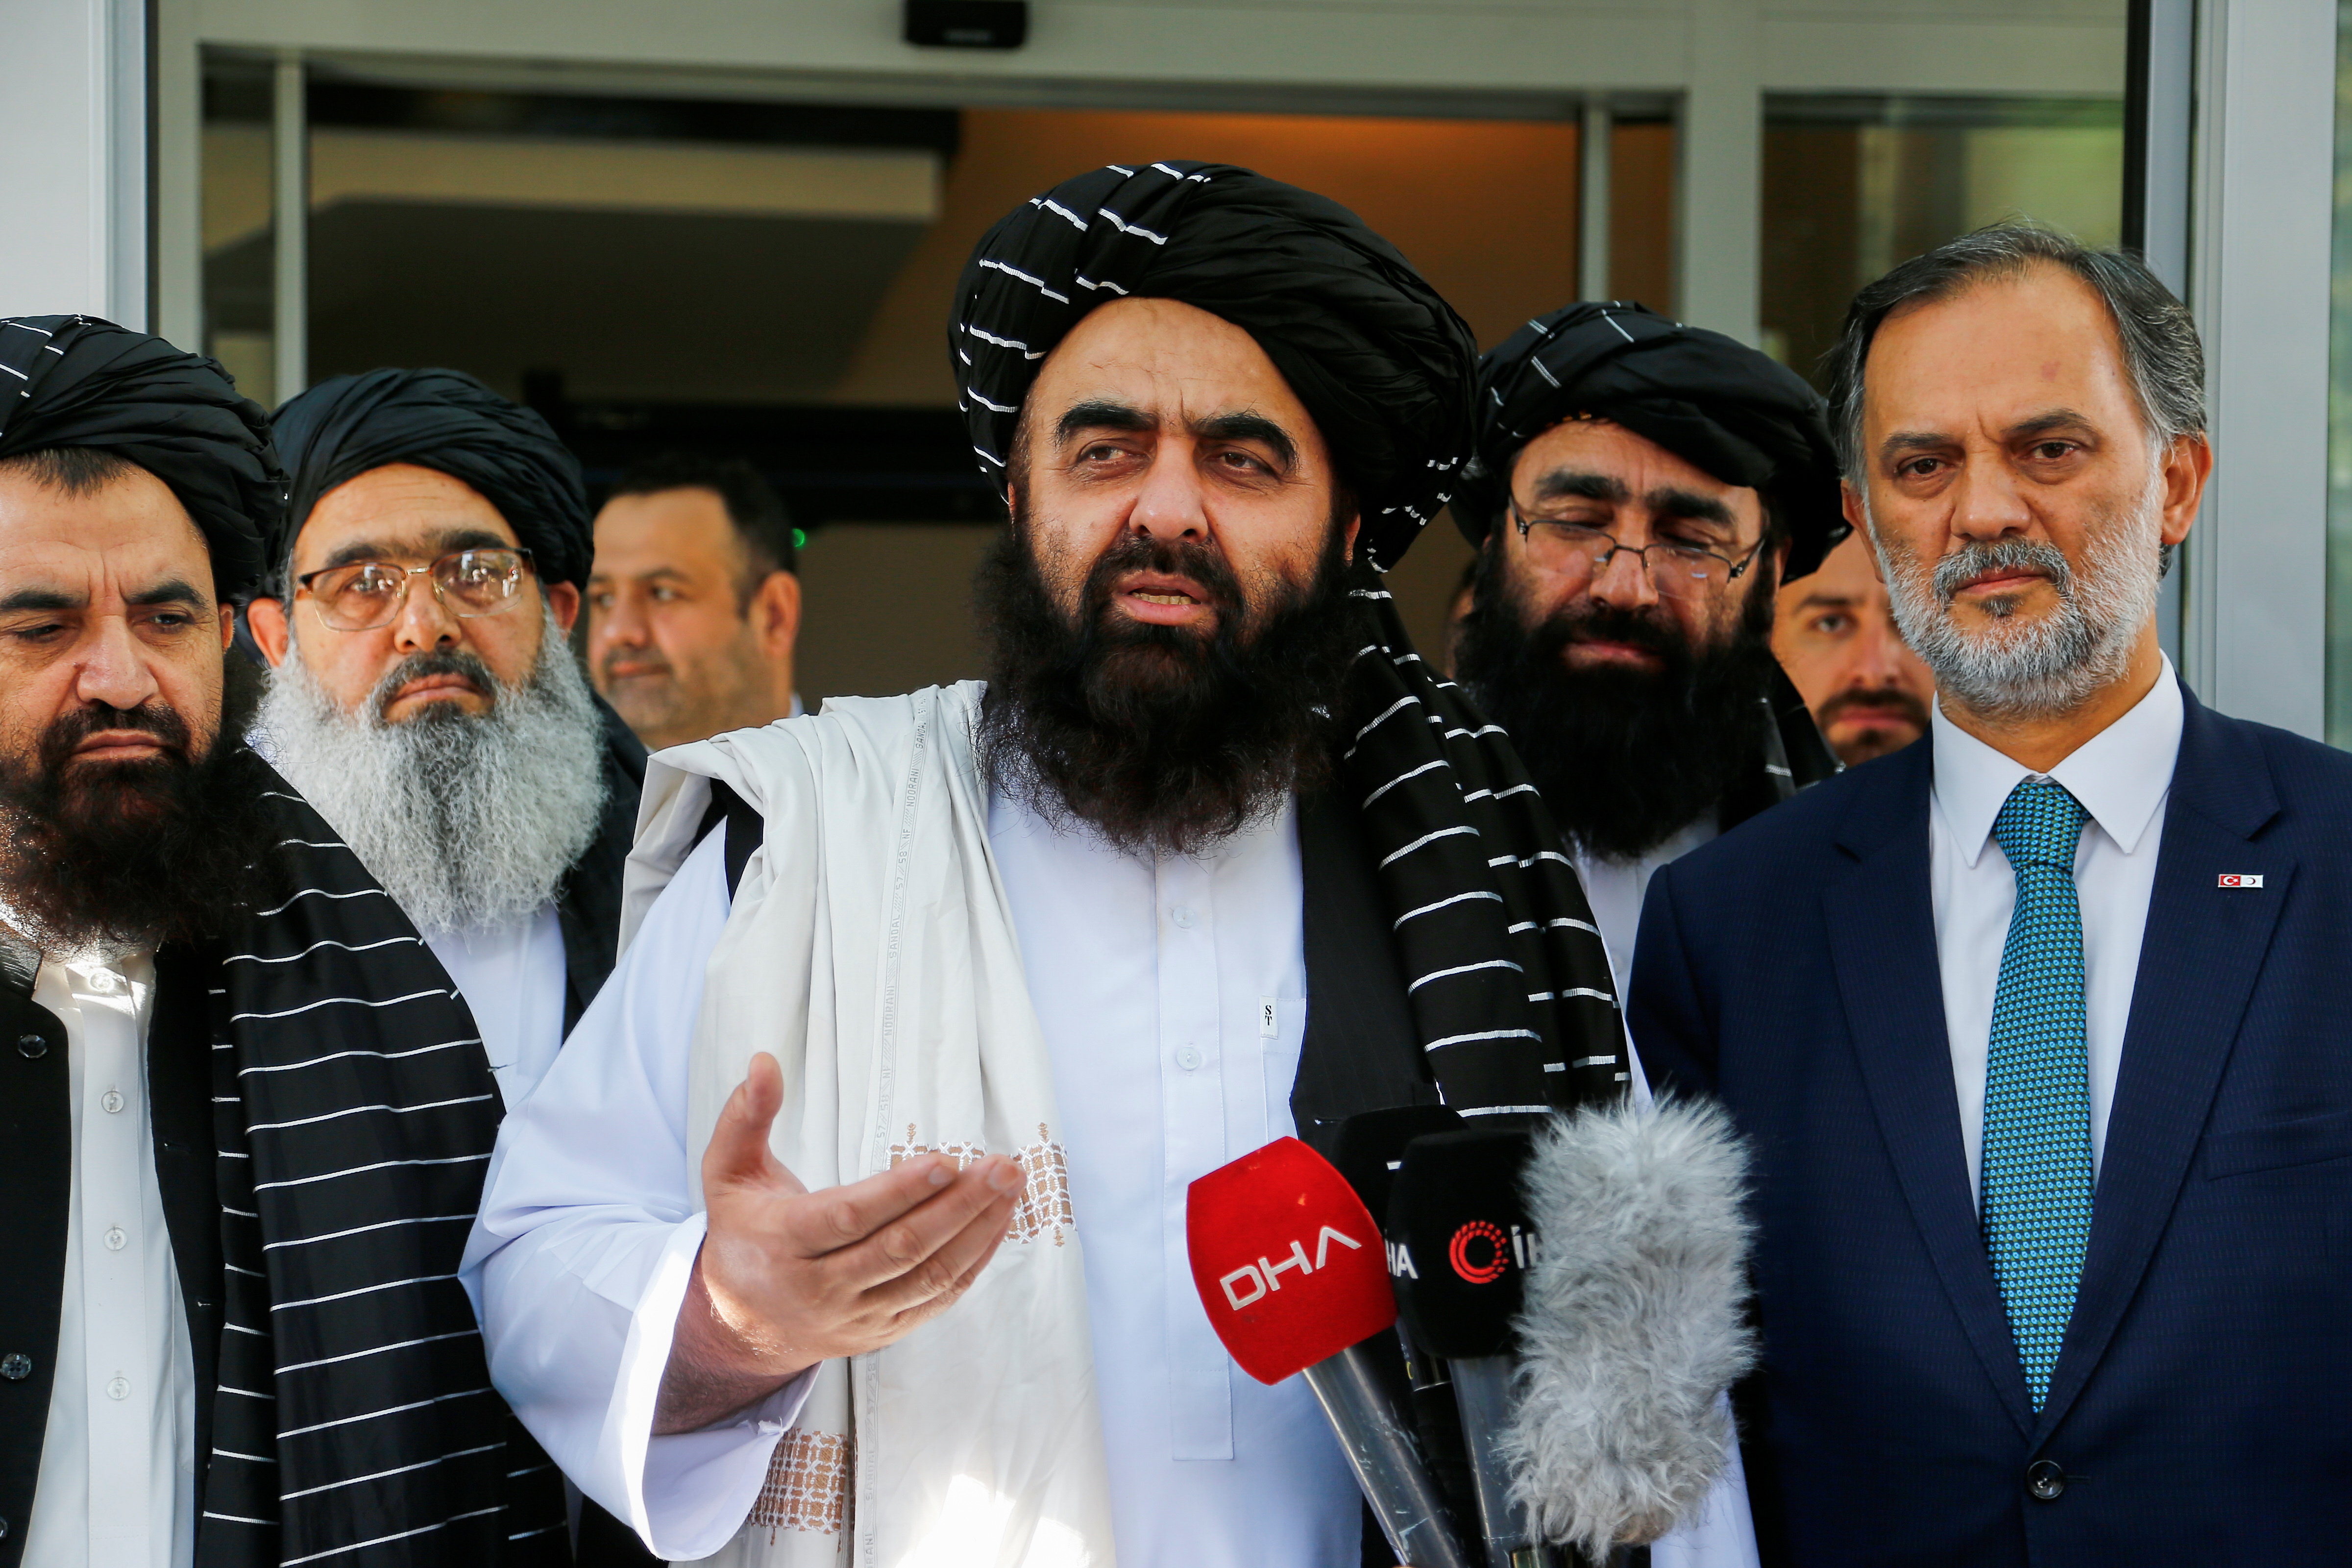 A Taliban delegation led by Afghanistan's acting FM Muttaqi meets meeting with officials of Turkish Red Crescent, in Ankara